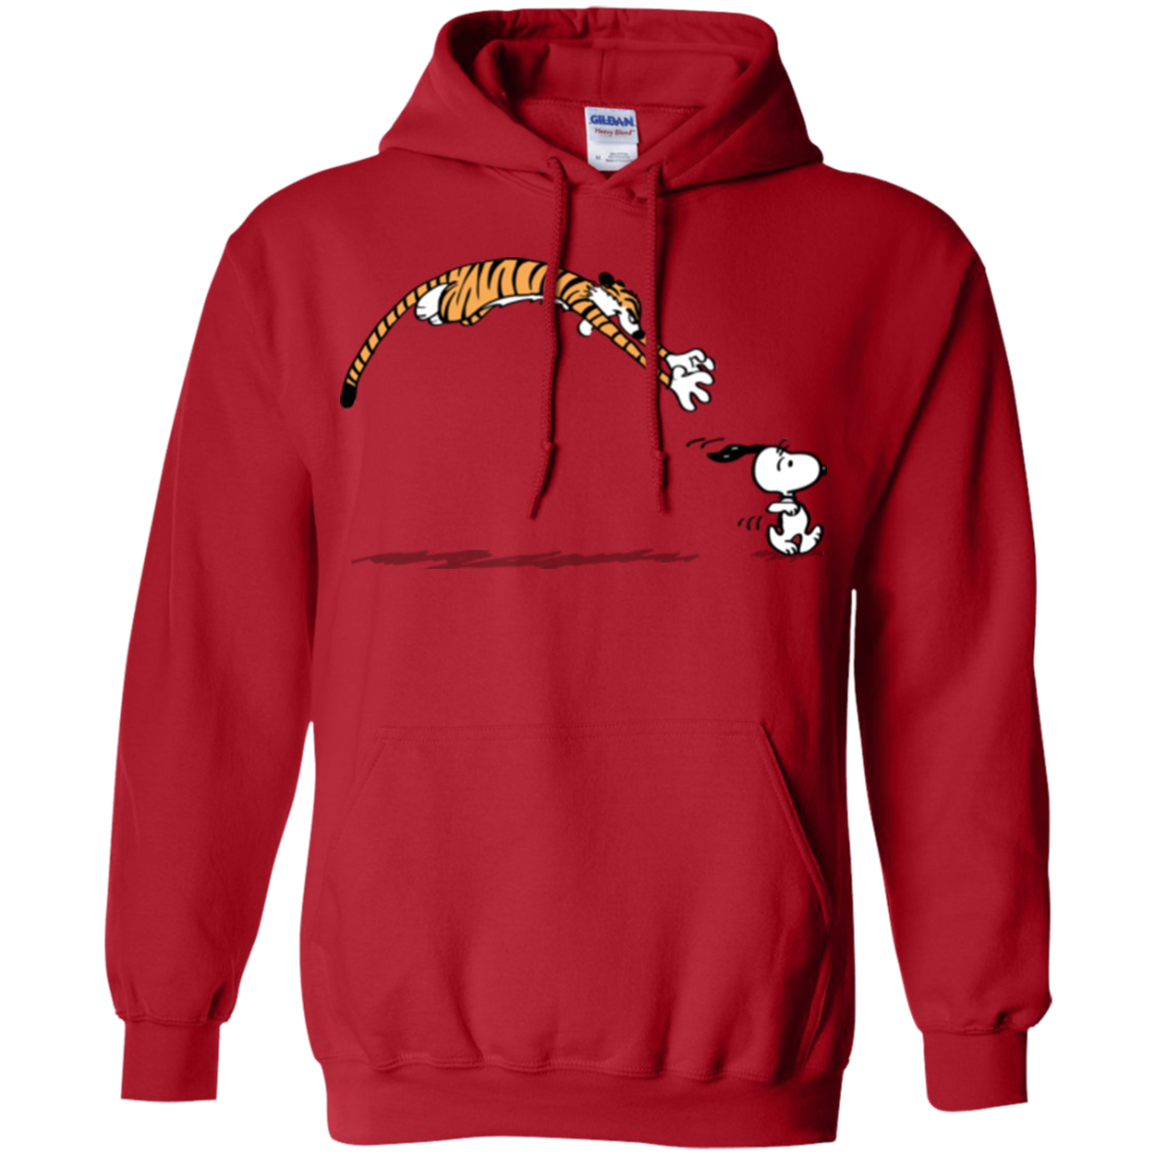 Pounce Pullover Hoodie